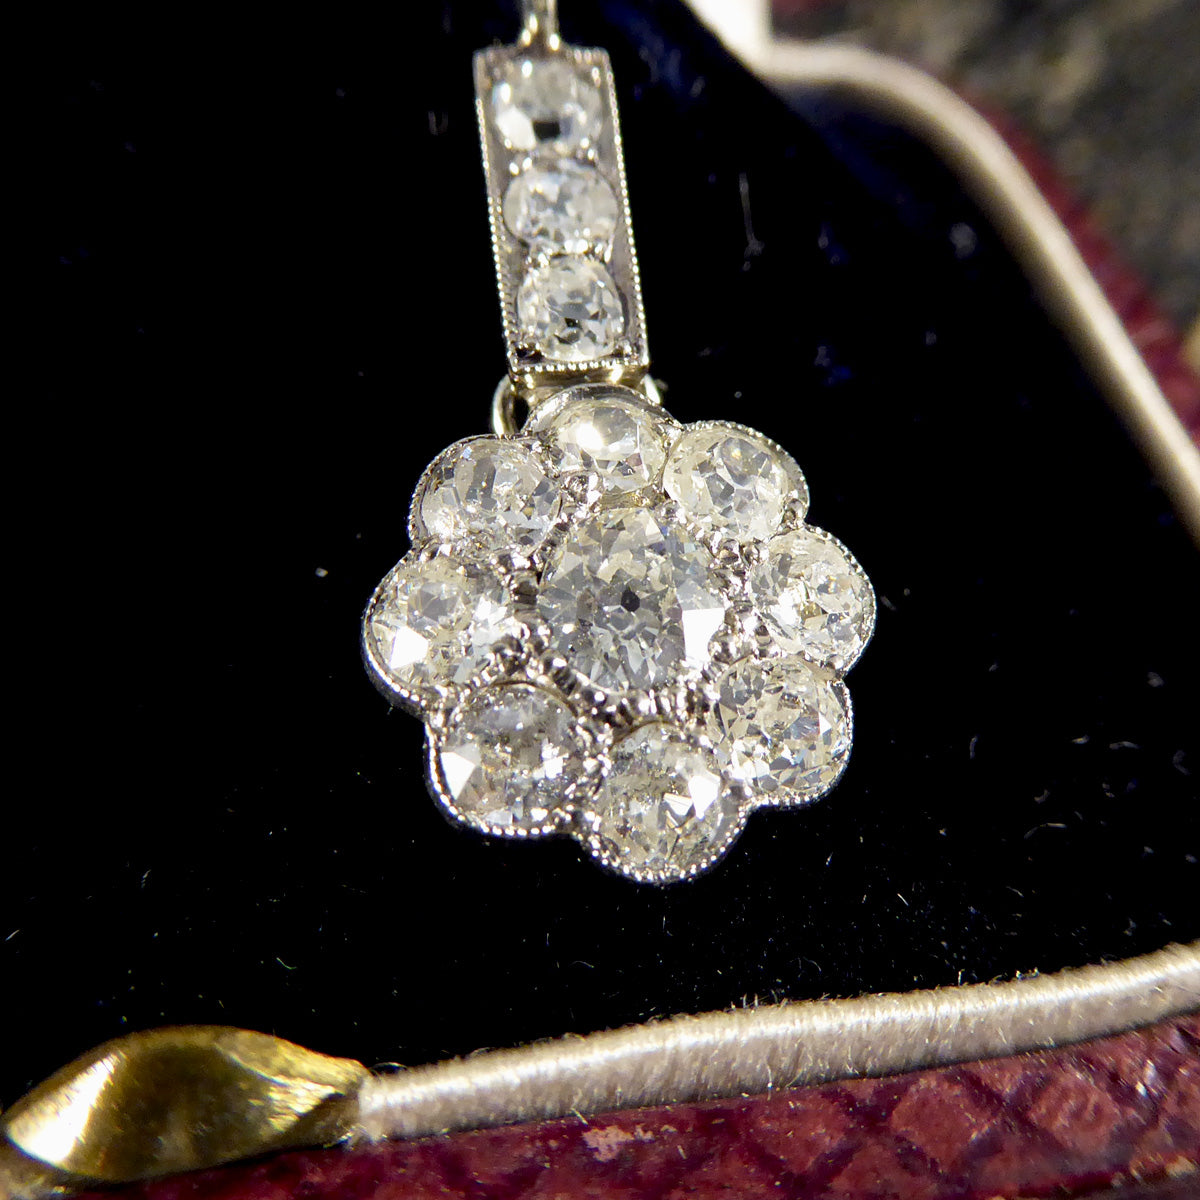 Antique Edwardian 2.62ct Diamond Daisy Cluster Drop Earrings in 18ct White Gold